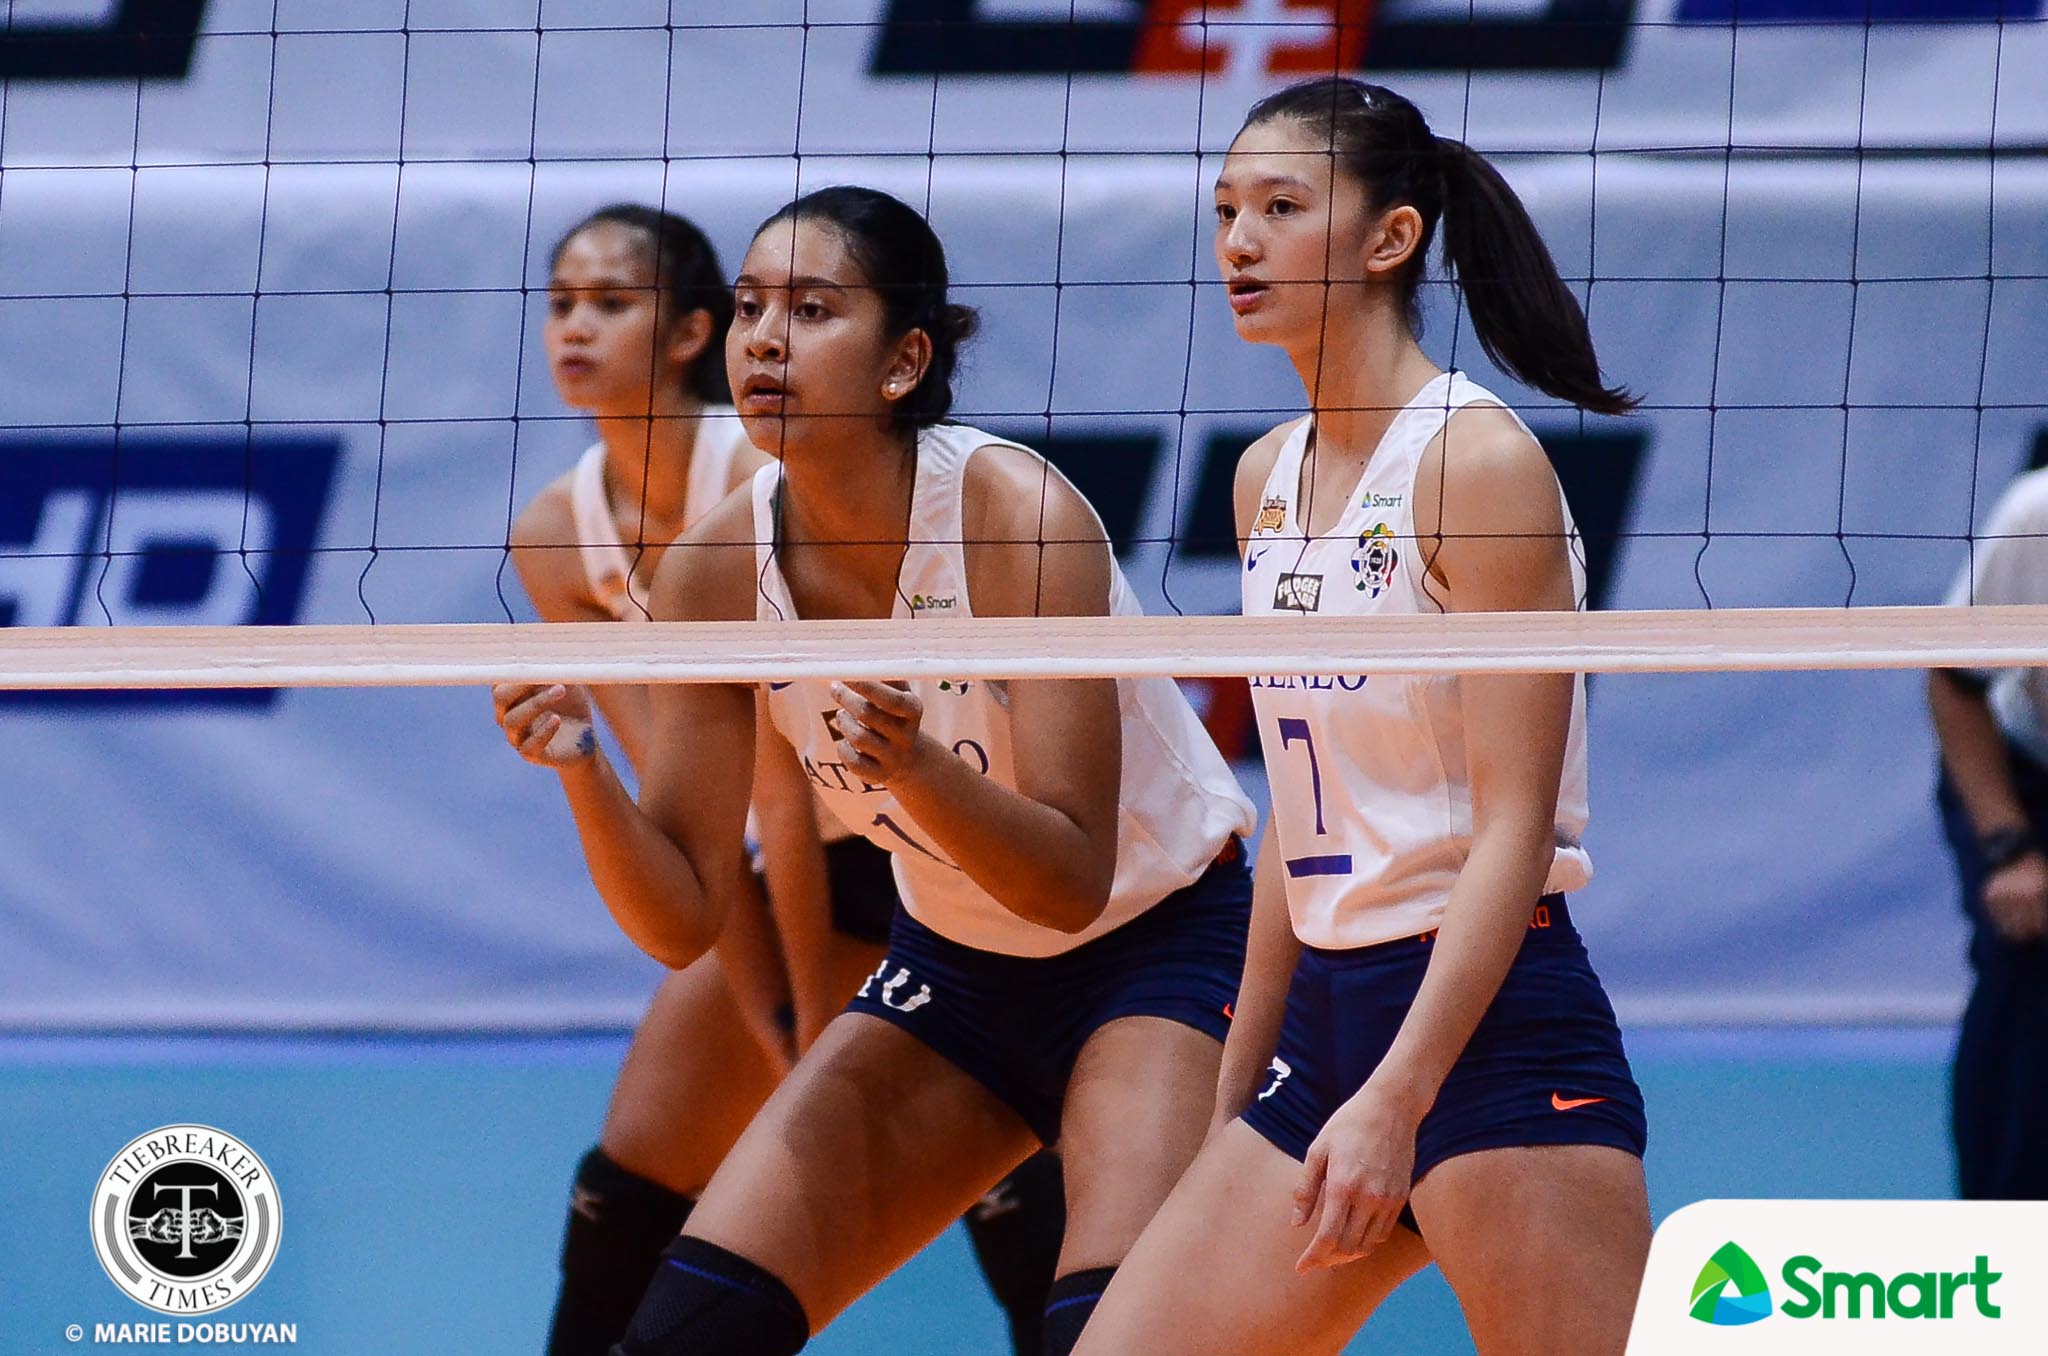 UAAP-80-womens-Volleyball-UST-ADMU-Tolentino-Madayag-1904 Lady Eagles turn to "Happy-Happy, Heartstrong" mantra for first win ADMU News UAAP Volleyball  - philippine sports news